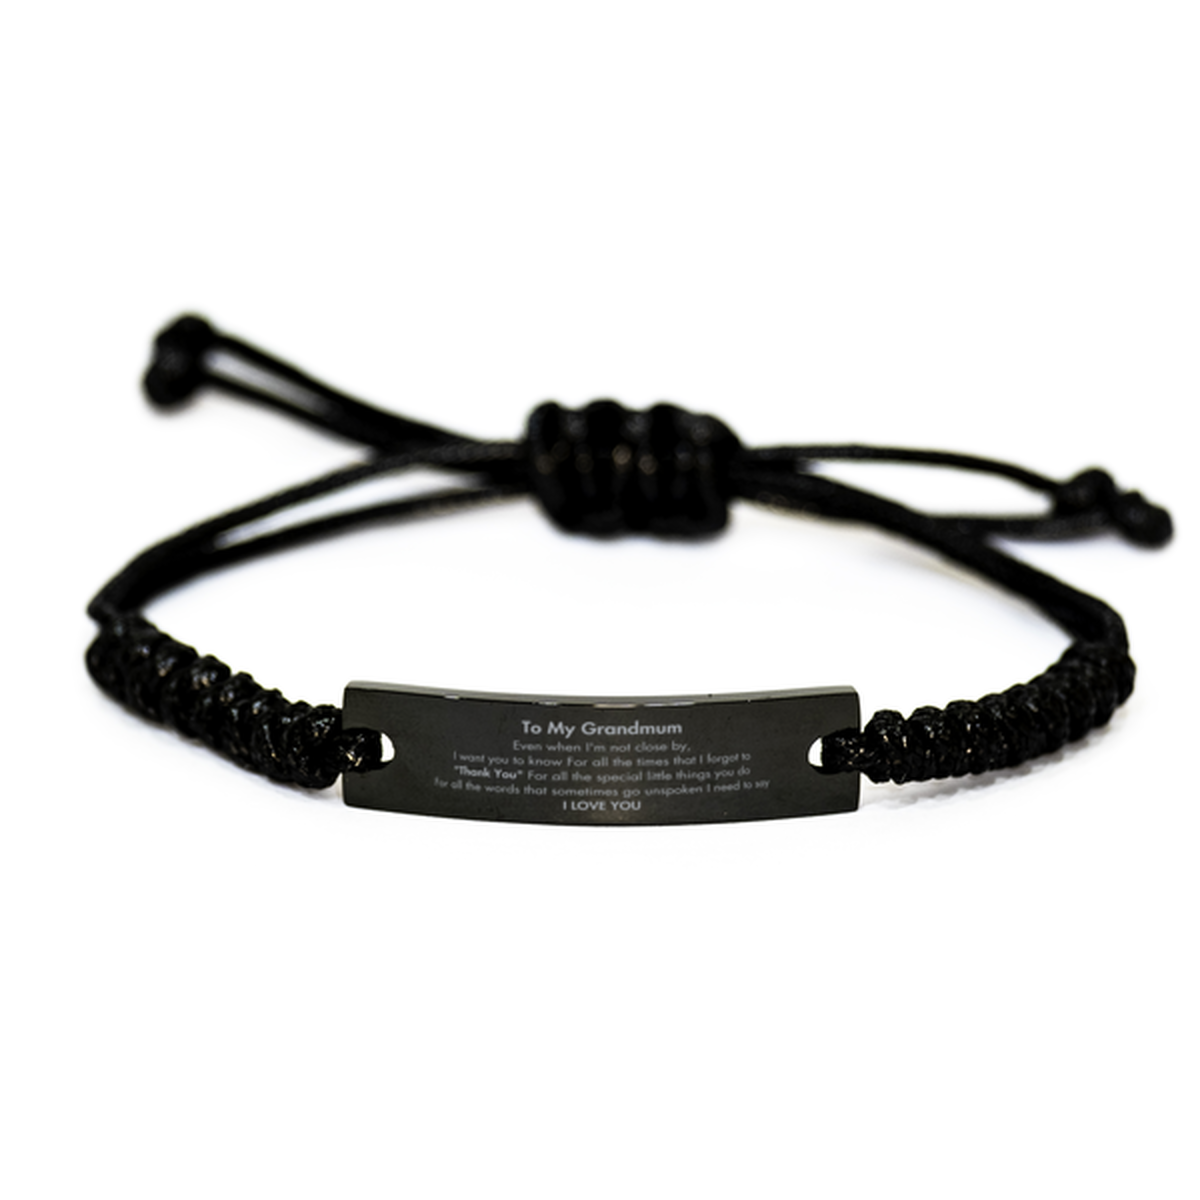 Thank You Gifts for Grandmum, Keepsake Black Rope Bracelet Gifts for Grandmum Birthday Mother's day Father's Day Grandmum For all the words That sometimes go unspoken I need to say I LOVE YOU